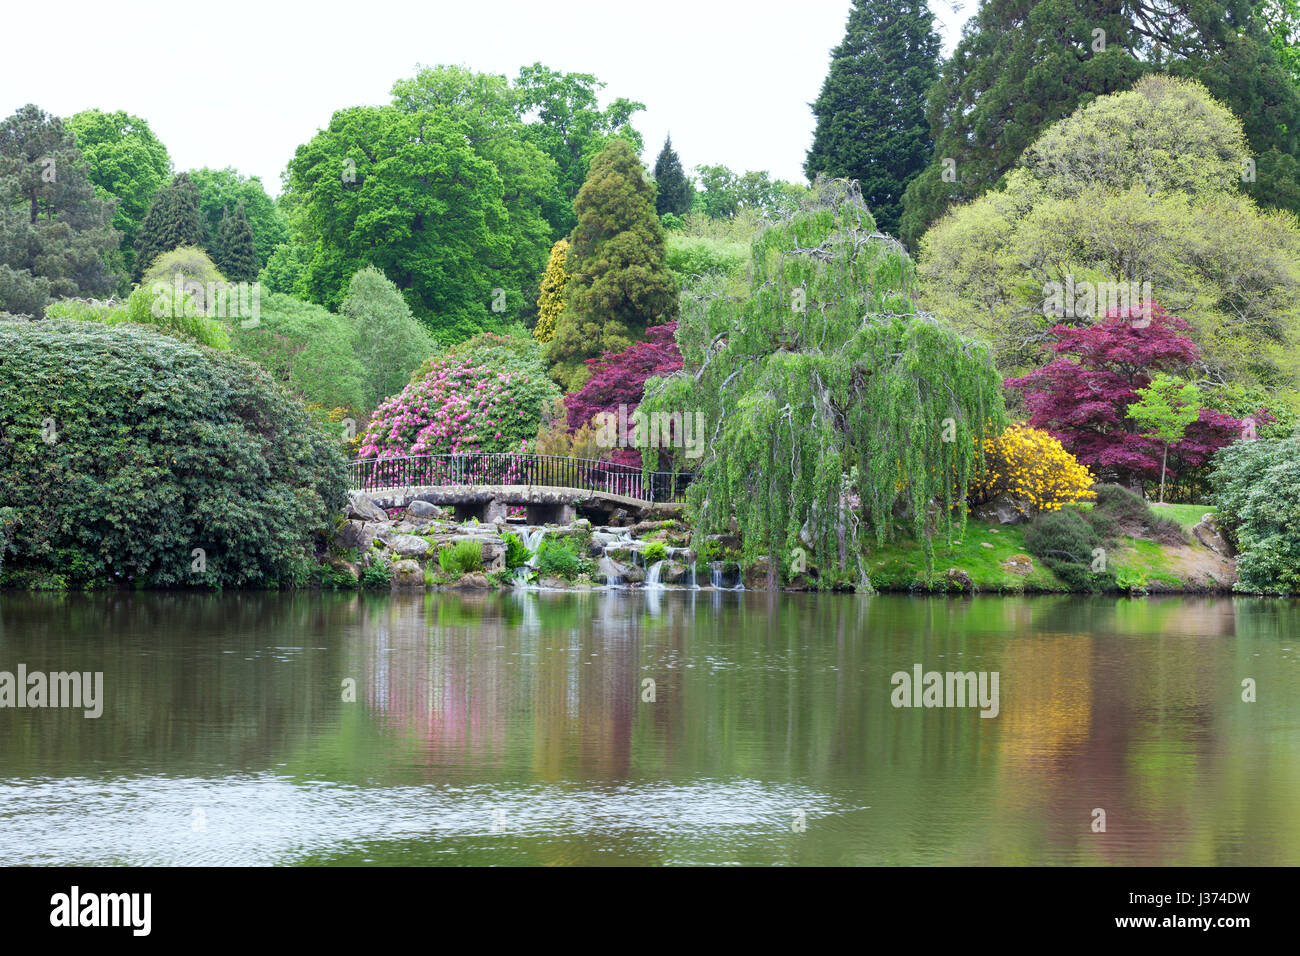 Landscaped garden by a lake with a bridge footpath among pink rhododendrons, yellow azalea in bloom, willow trees, conifers, in an English countryside Stock Photo